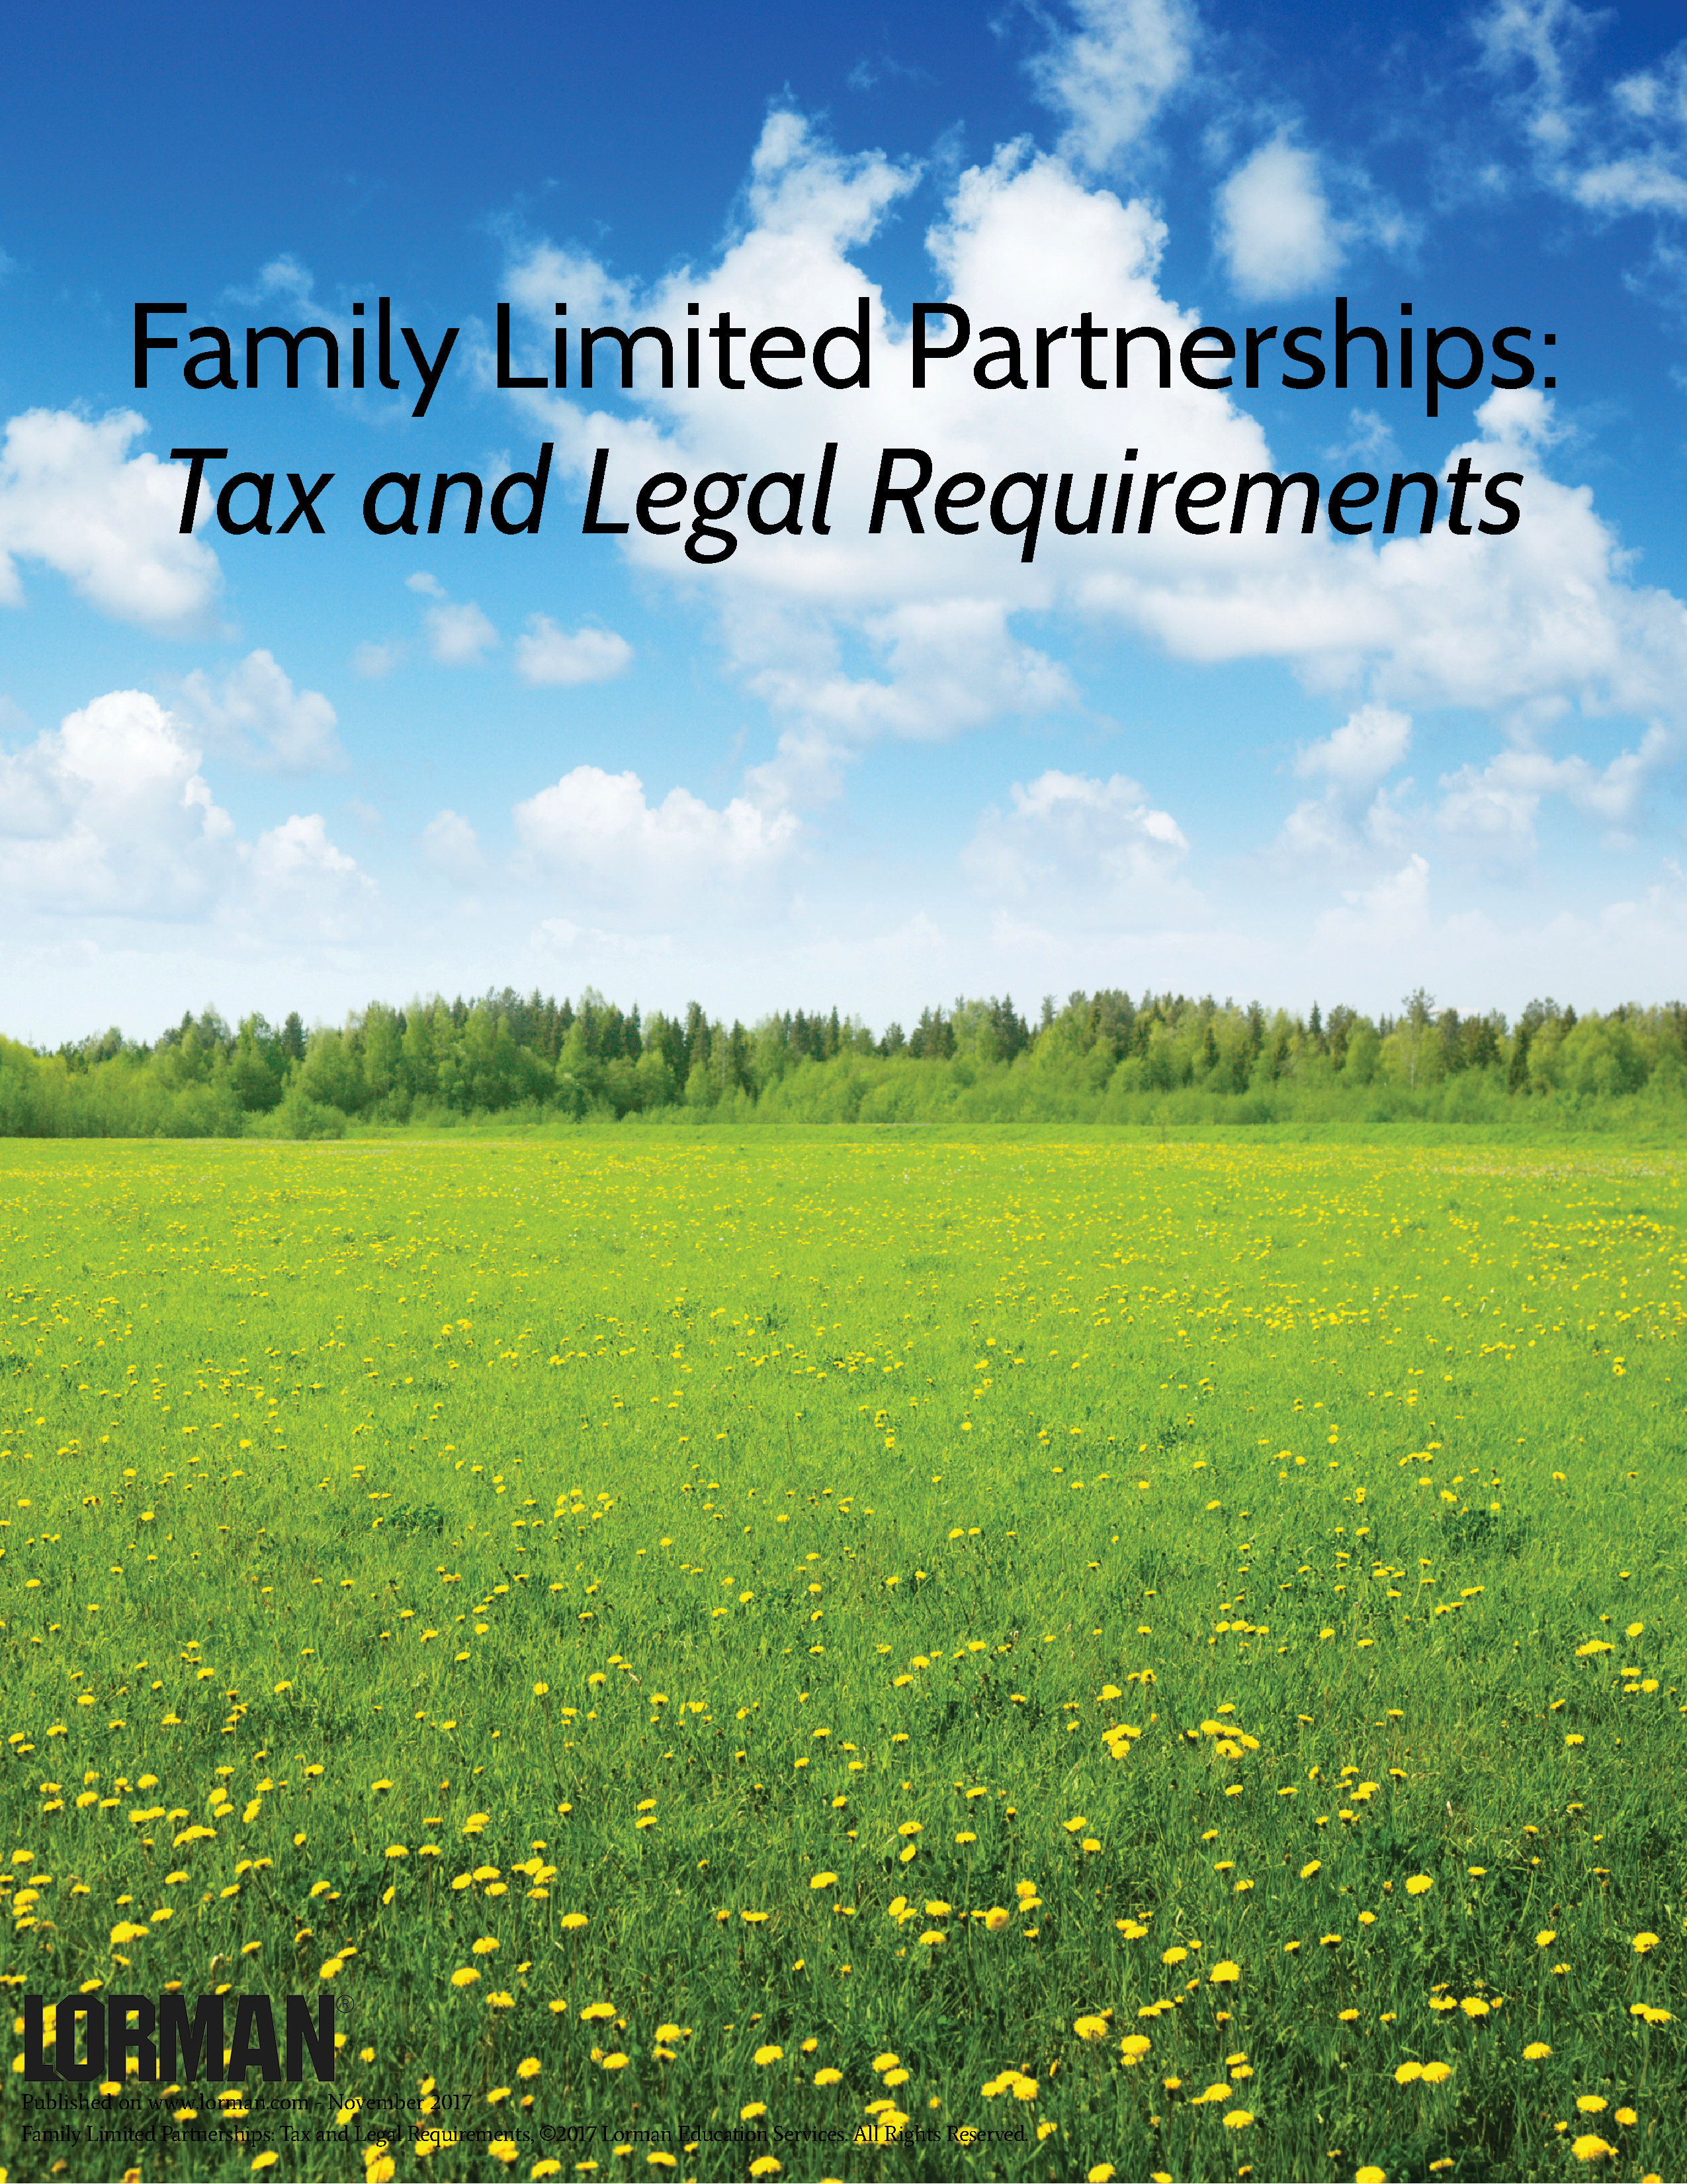 Family Limited Partnerships: Tax and Legal Requirements